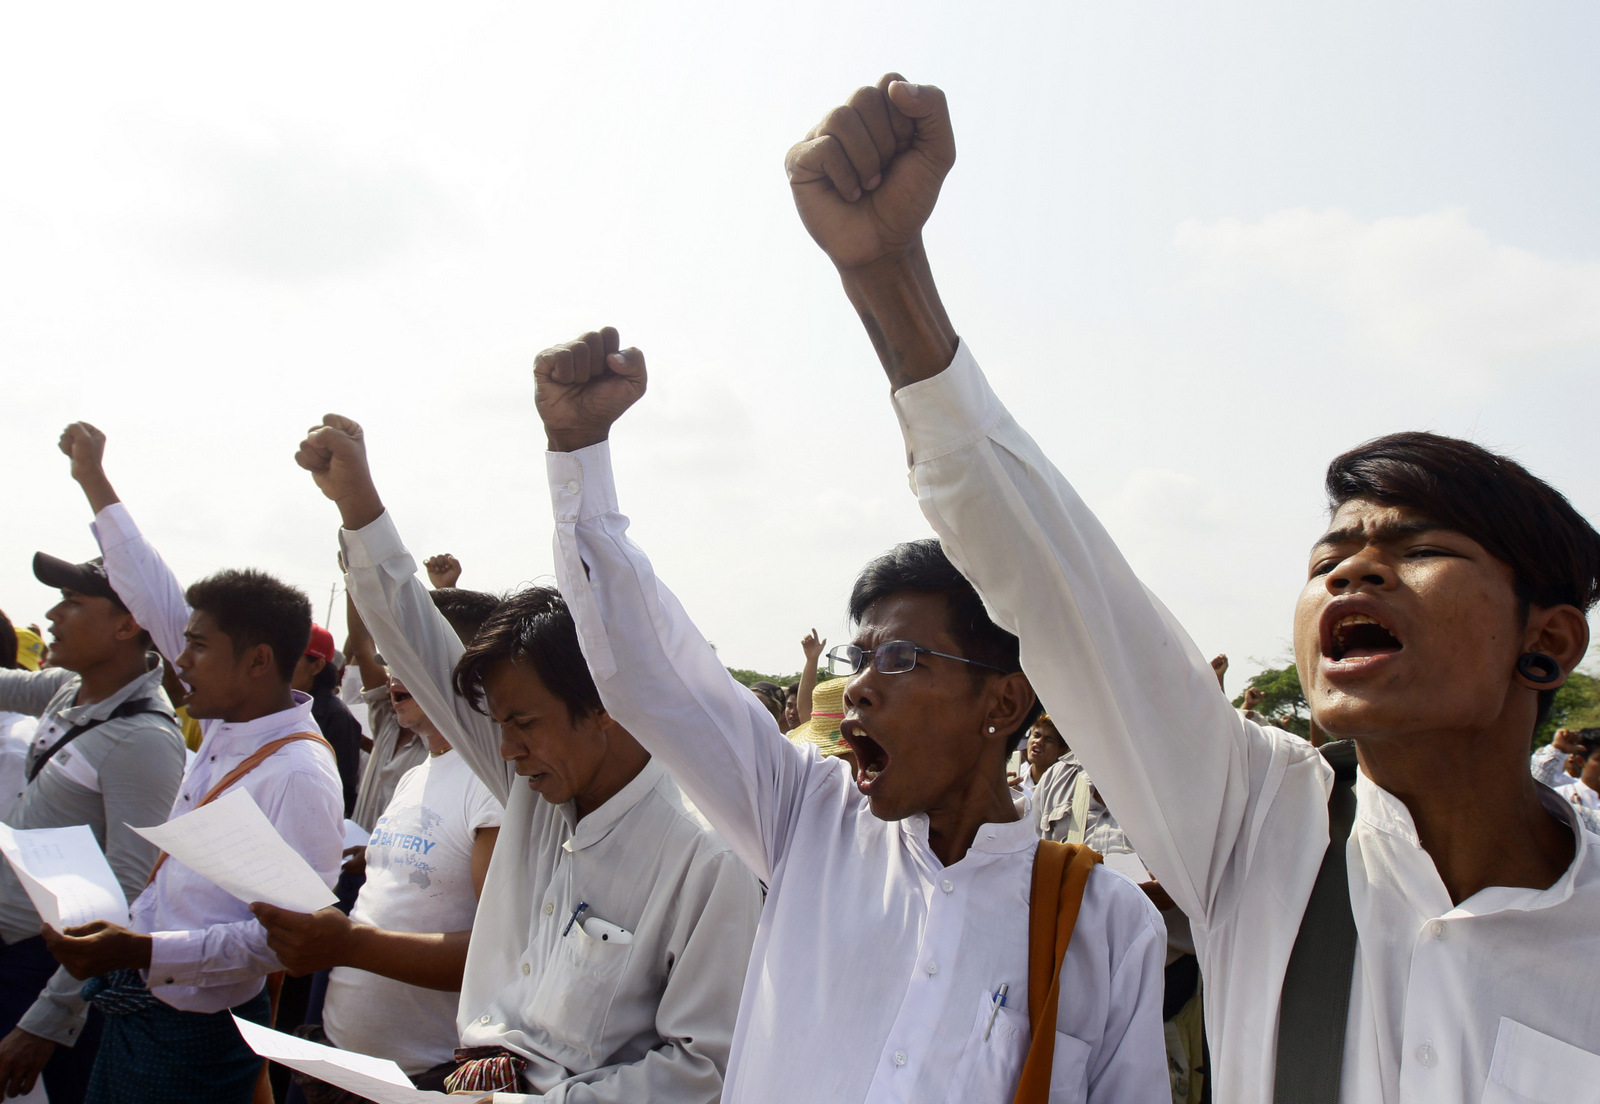 Members of a Myanmar's ultra-nationalist Buddhist group shout slogans during a protest rally in Nayptitaw, Myanmar, Saturday, May 20, 2017, against Religious Minister Thura Aung Ko for his intervention in a case in which Myanmar Now news chief reporter Swe Win leveled allegations against Wirathu, a high-profile leader of the Myanmar Buddhist organization known as Ma Ba Tha, after the monk praised the assassination of prominent Muslim lawyer Ko Ni who was a legal advisor to Aung San Suu Kyi's government. (AP/Aung Shine Oo)